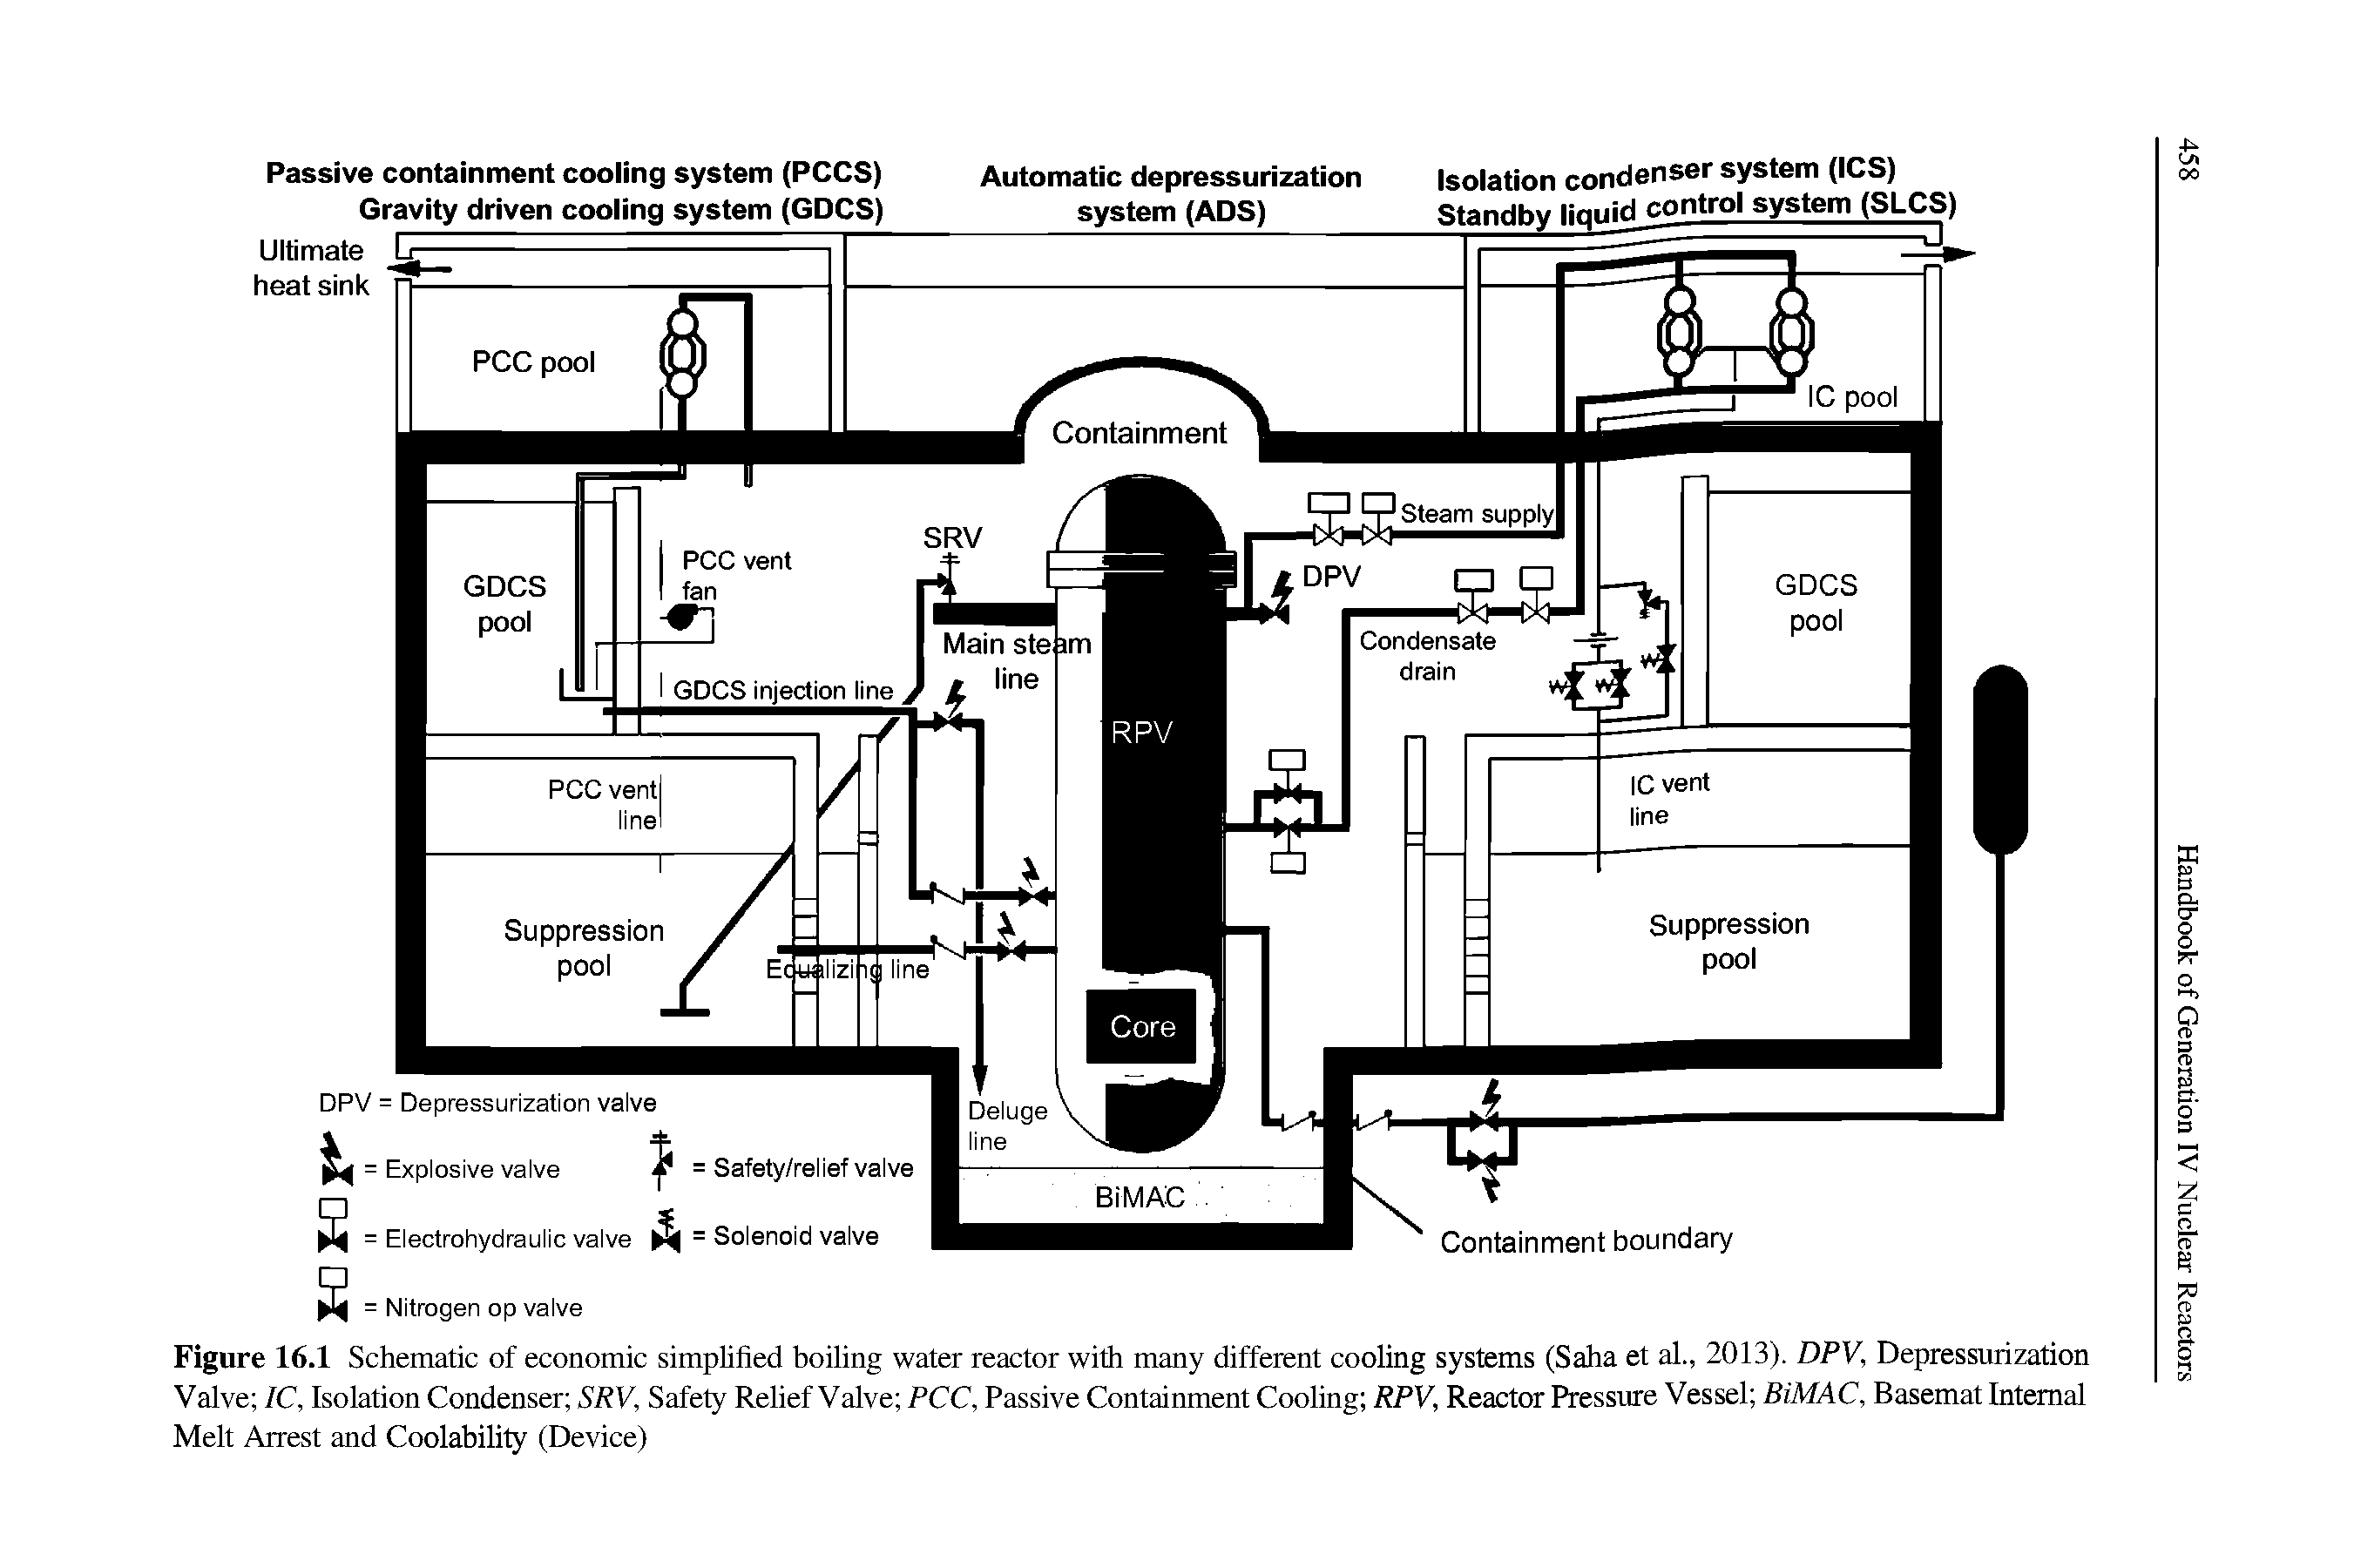 Figure 16.1 Schematic of economic simplified boiling water reactor with many different cooling systems (Saha et al., 2013). DPV, Depressurization Valve IC, Isolation Condenser SRV, Safety Relief Valve PCC, Passive Containment Cooling RPV, Reactor Pressure Vessel BiMAC, Basemat Internal Melt Arrest and Coolability (Device)...